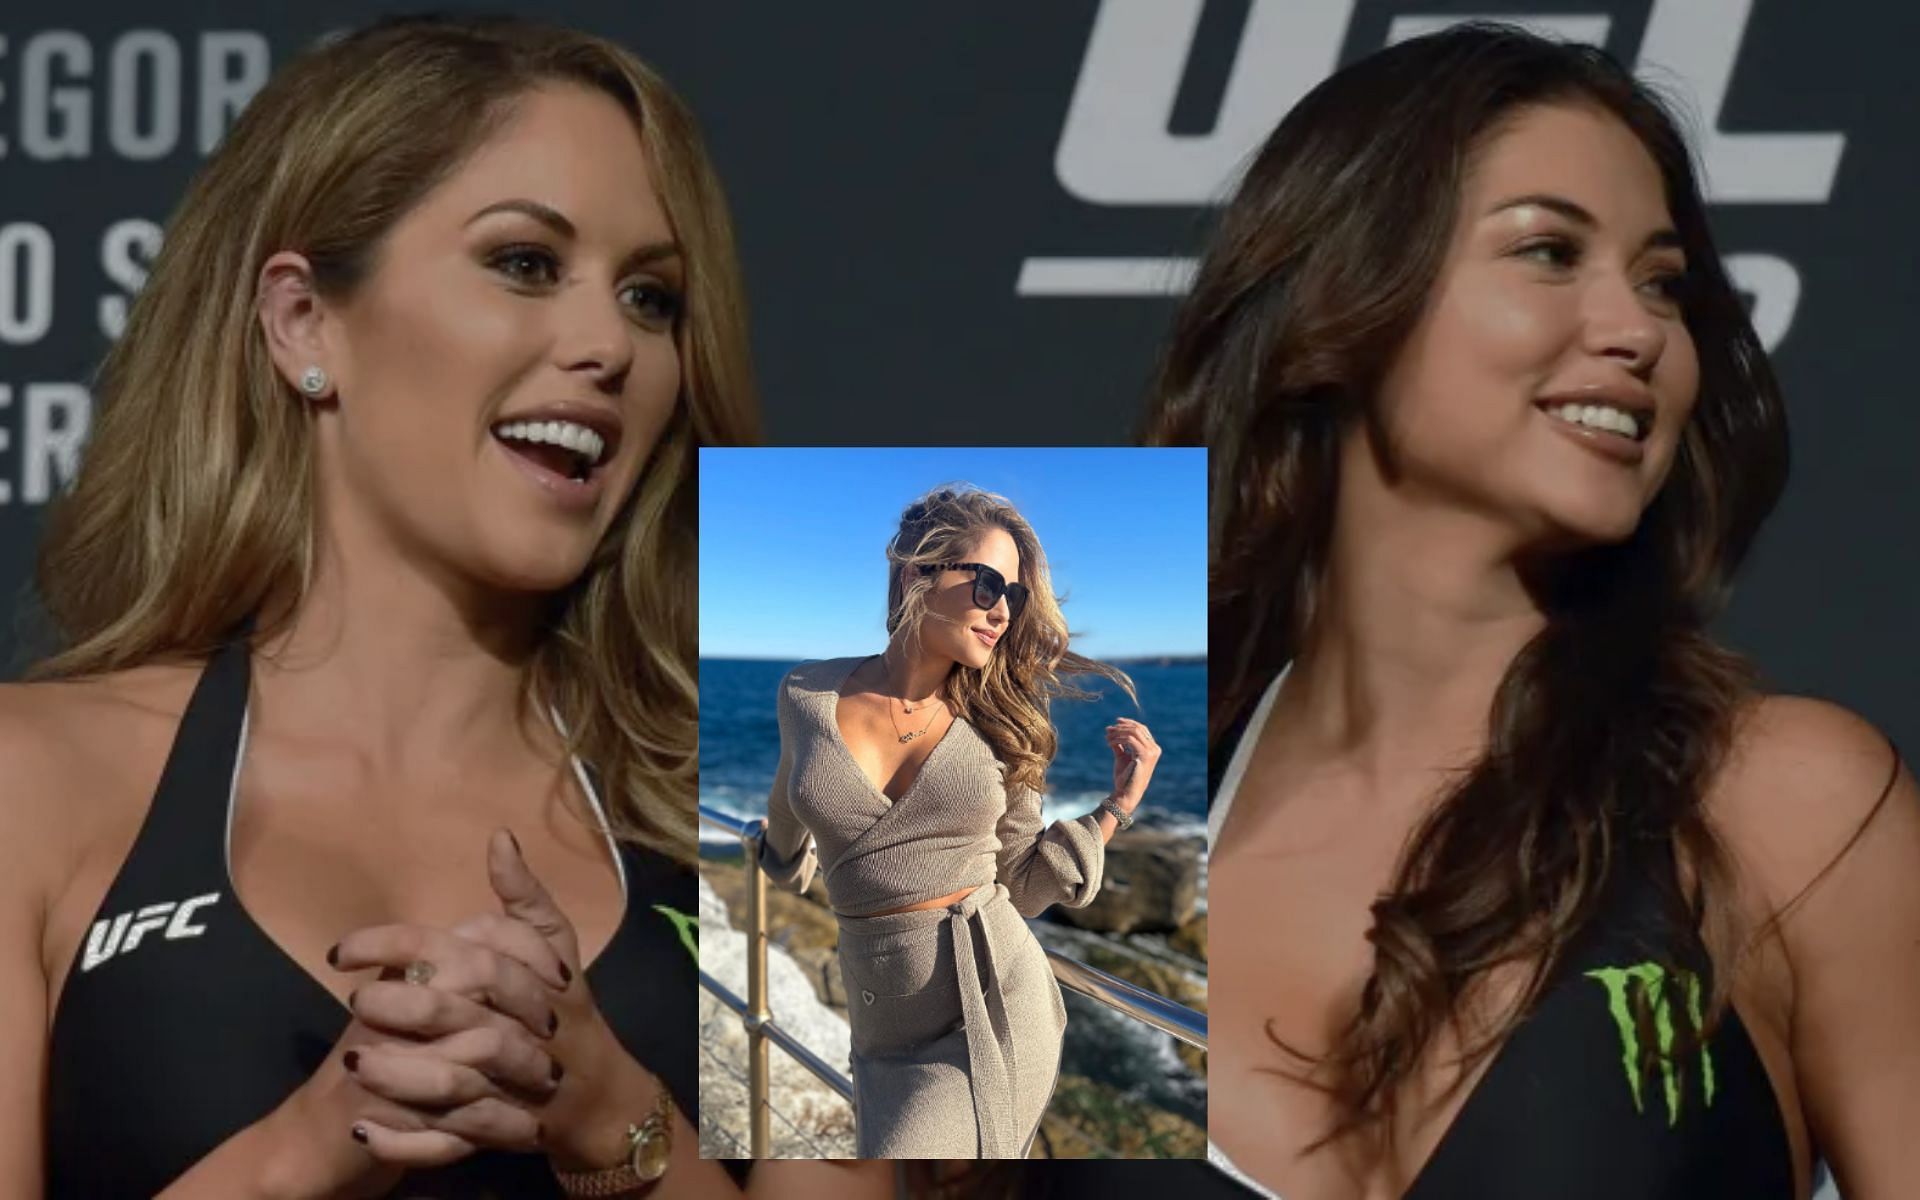 Brittney Palmer and Arianny Celeste [Image credits: @ufc and @brittneypalmer on Instagram]